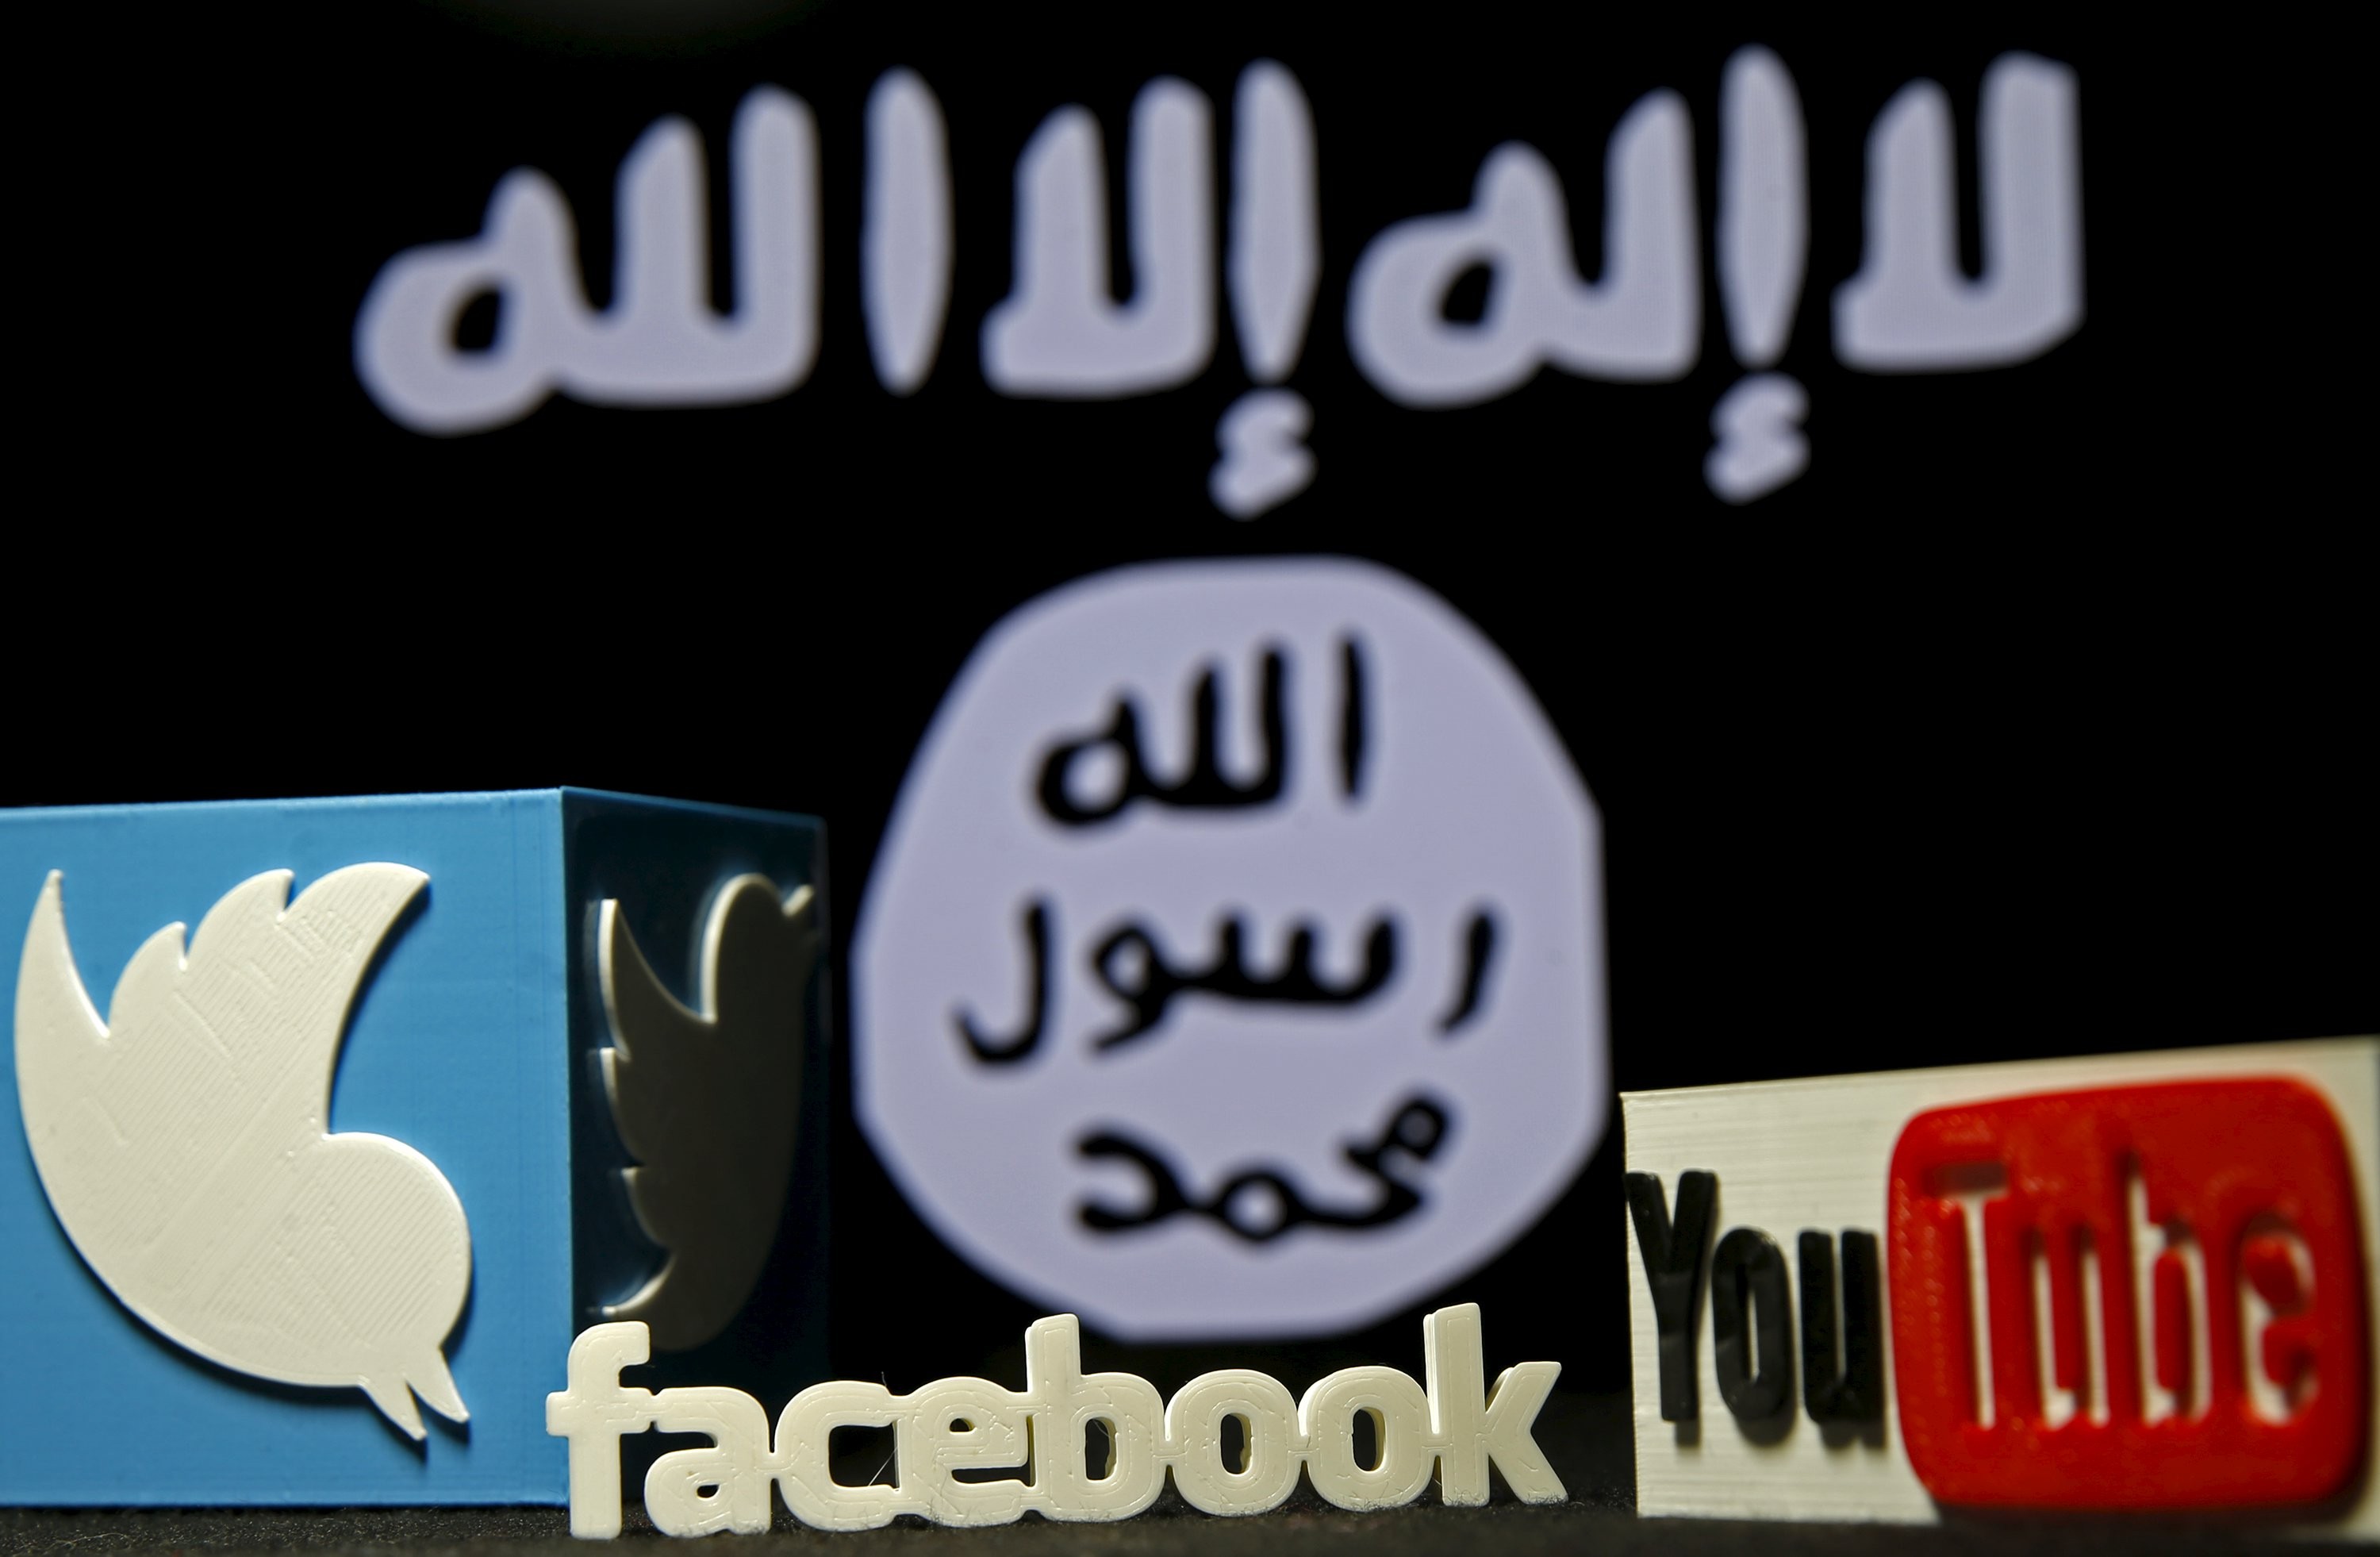 Three-dimensional plastic representations of the Twitter, Facebook and YouTube logos in front of a flag of so-called Islamic State, displayed in the Bosnian city of Zenica, on February 3 last year. Terrorist groups rely heavily on social media and the internet to spread jihadist propaganda. Photo: Reuters